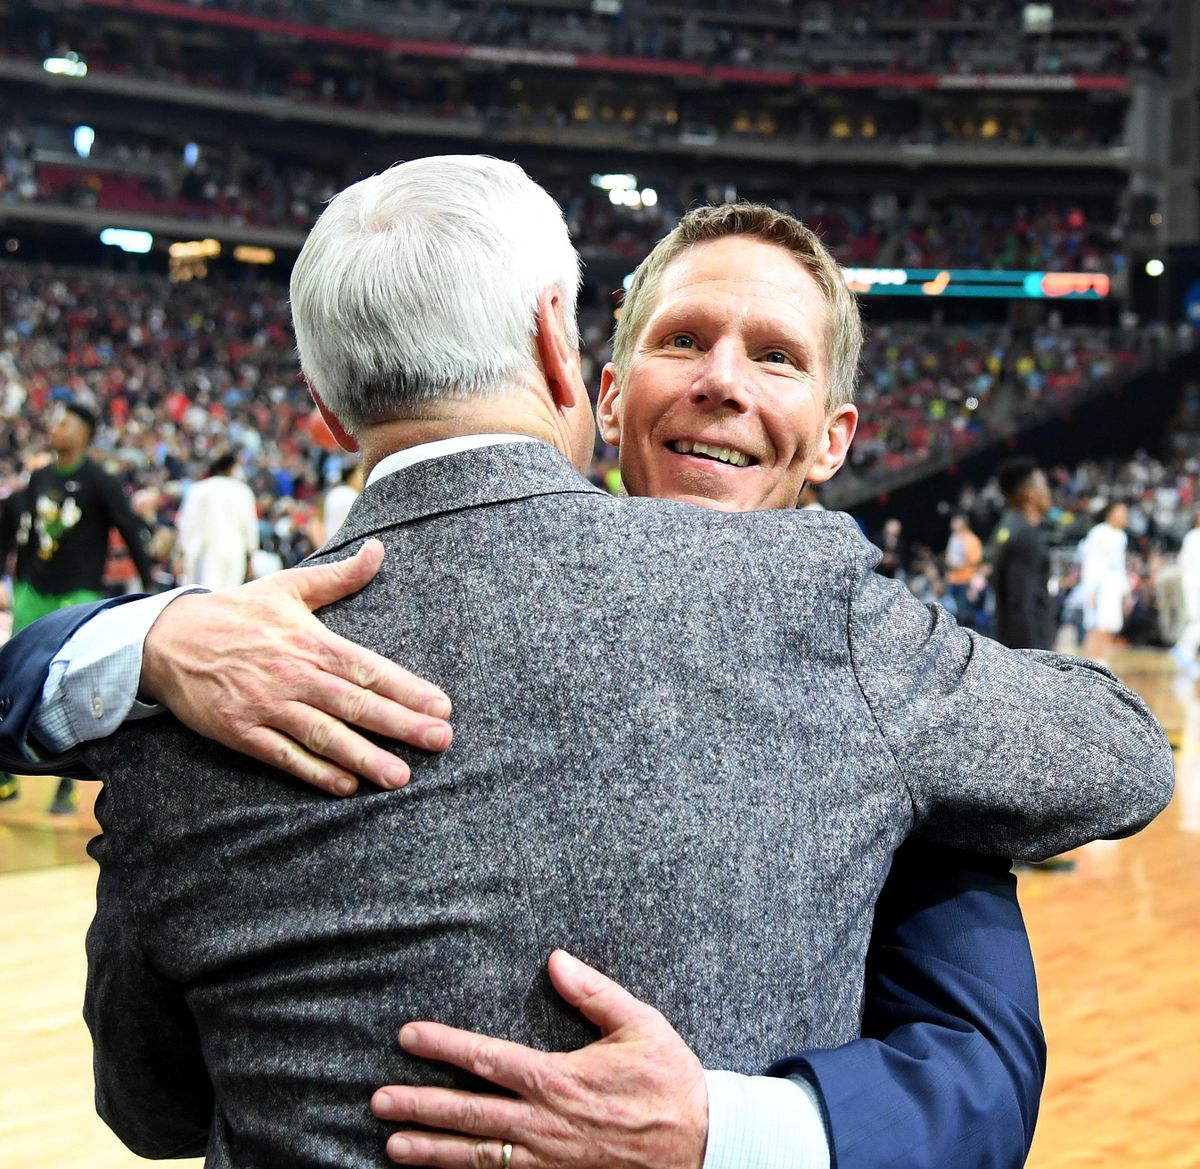 After beating South Carolina 77-73, Gonzaga head coach Mark Few hugs North Carolina coach Roy Williams who was coming onto the court for the Tar Heels’ game against Oregon on Saturday in Phoenix. (Colin Mulvany / The Spokesman-Review)